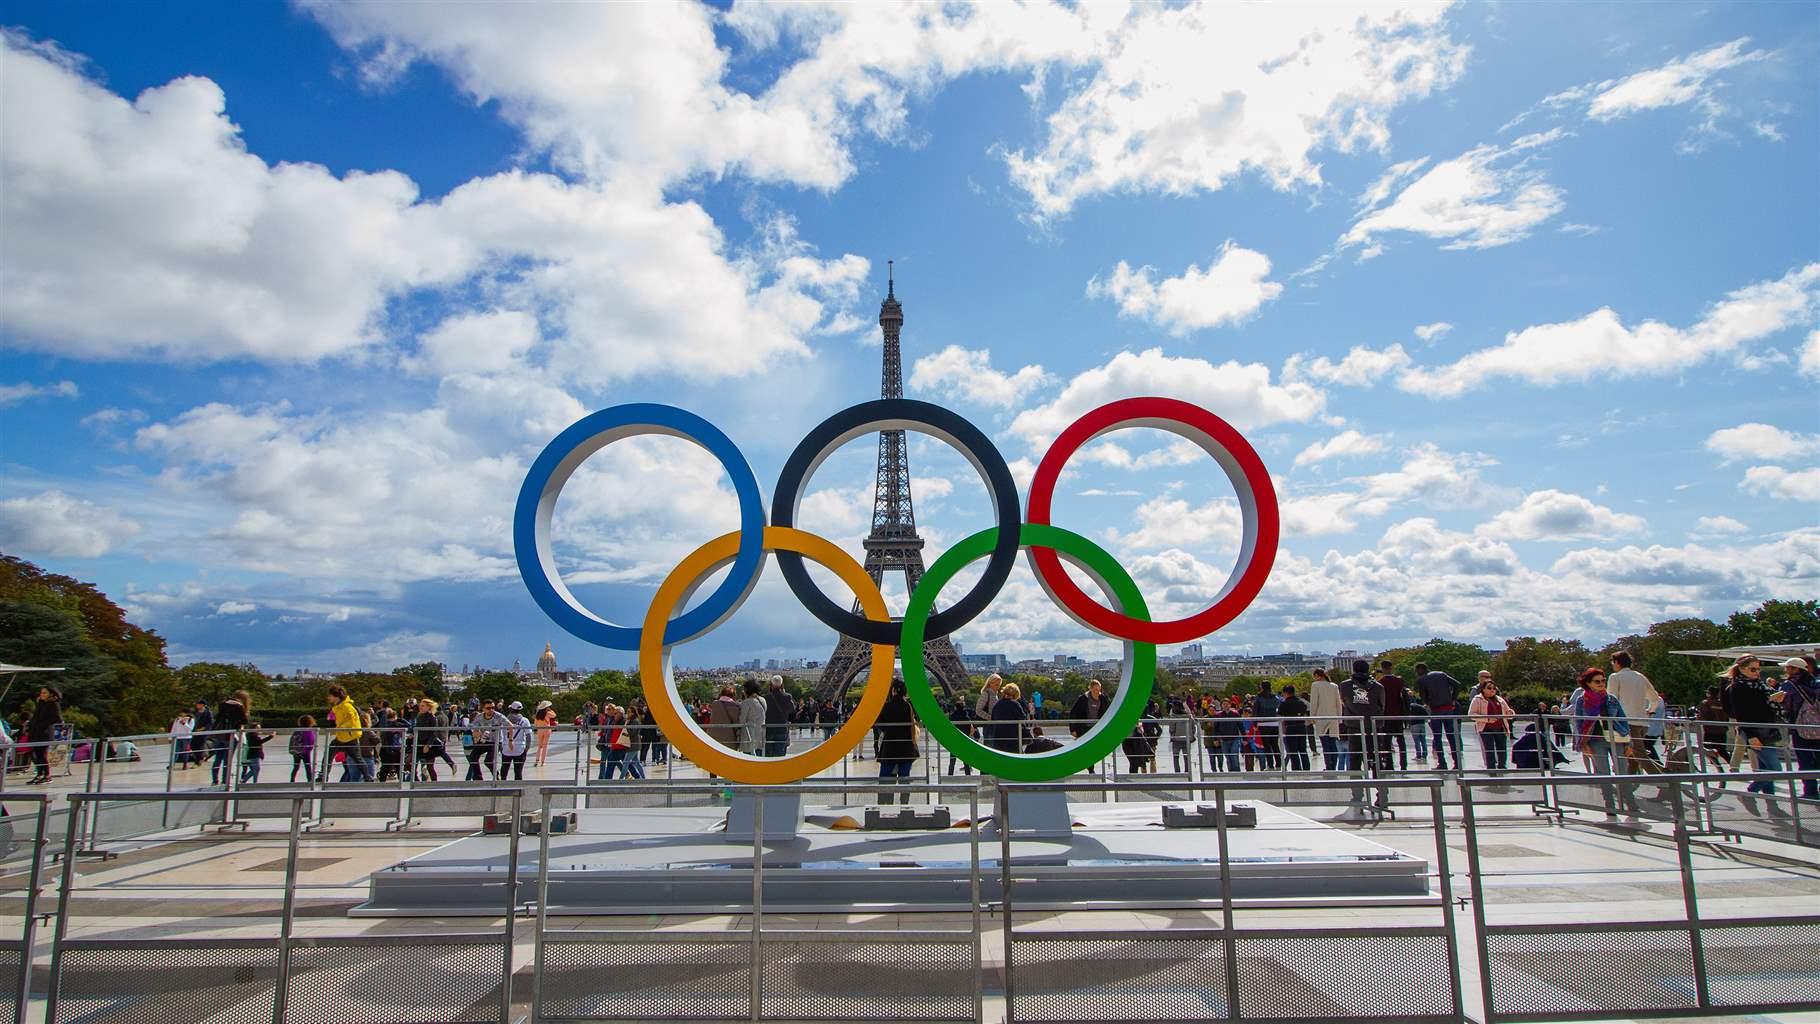 The Olympic Rings with the Eiffel Tower in the background in celebration of Paris’ winning bid to host the 2024 Summer Games. 